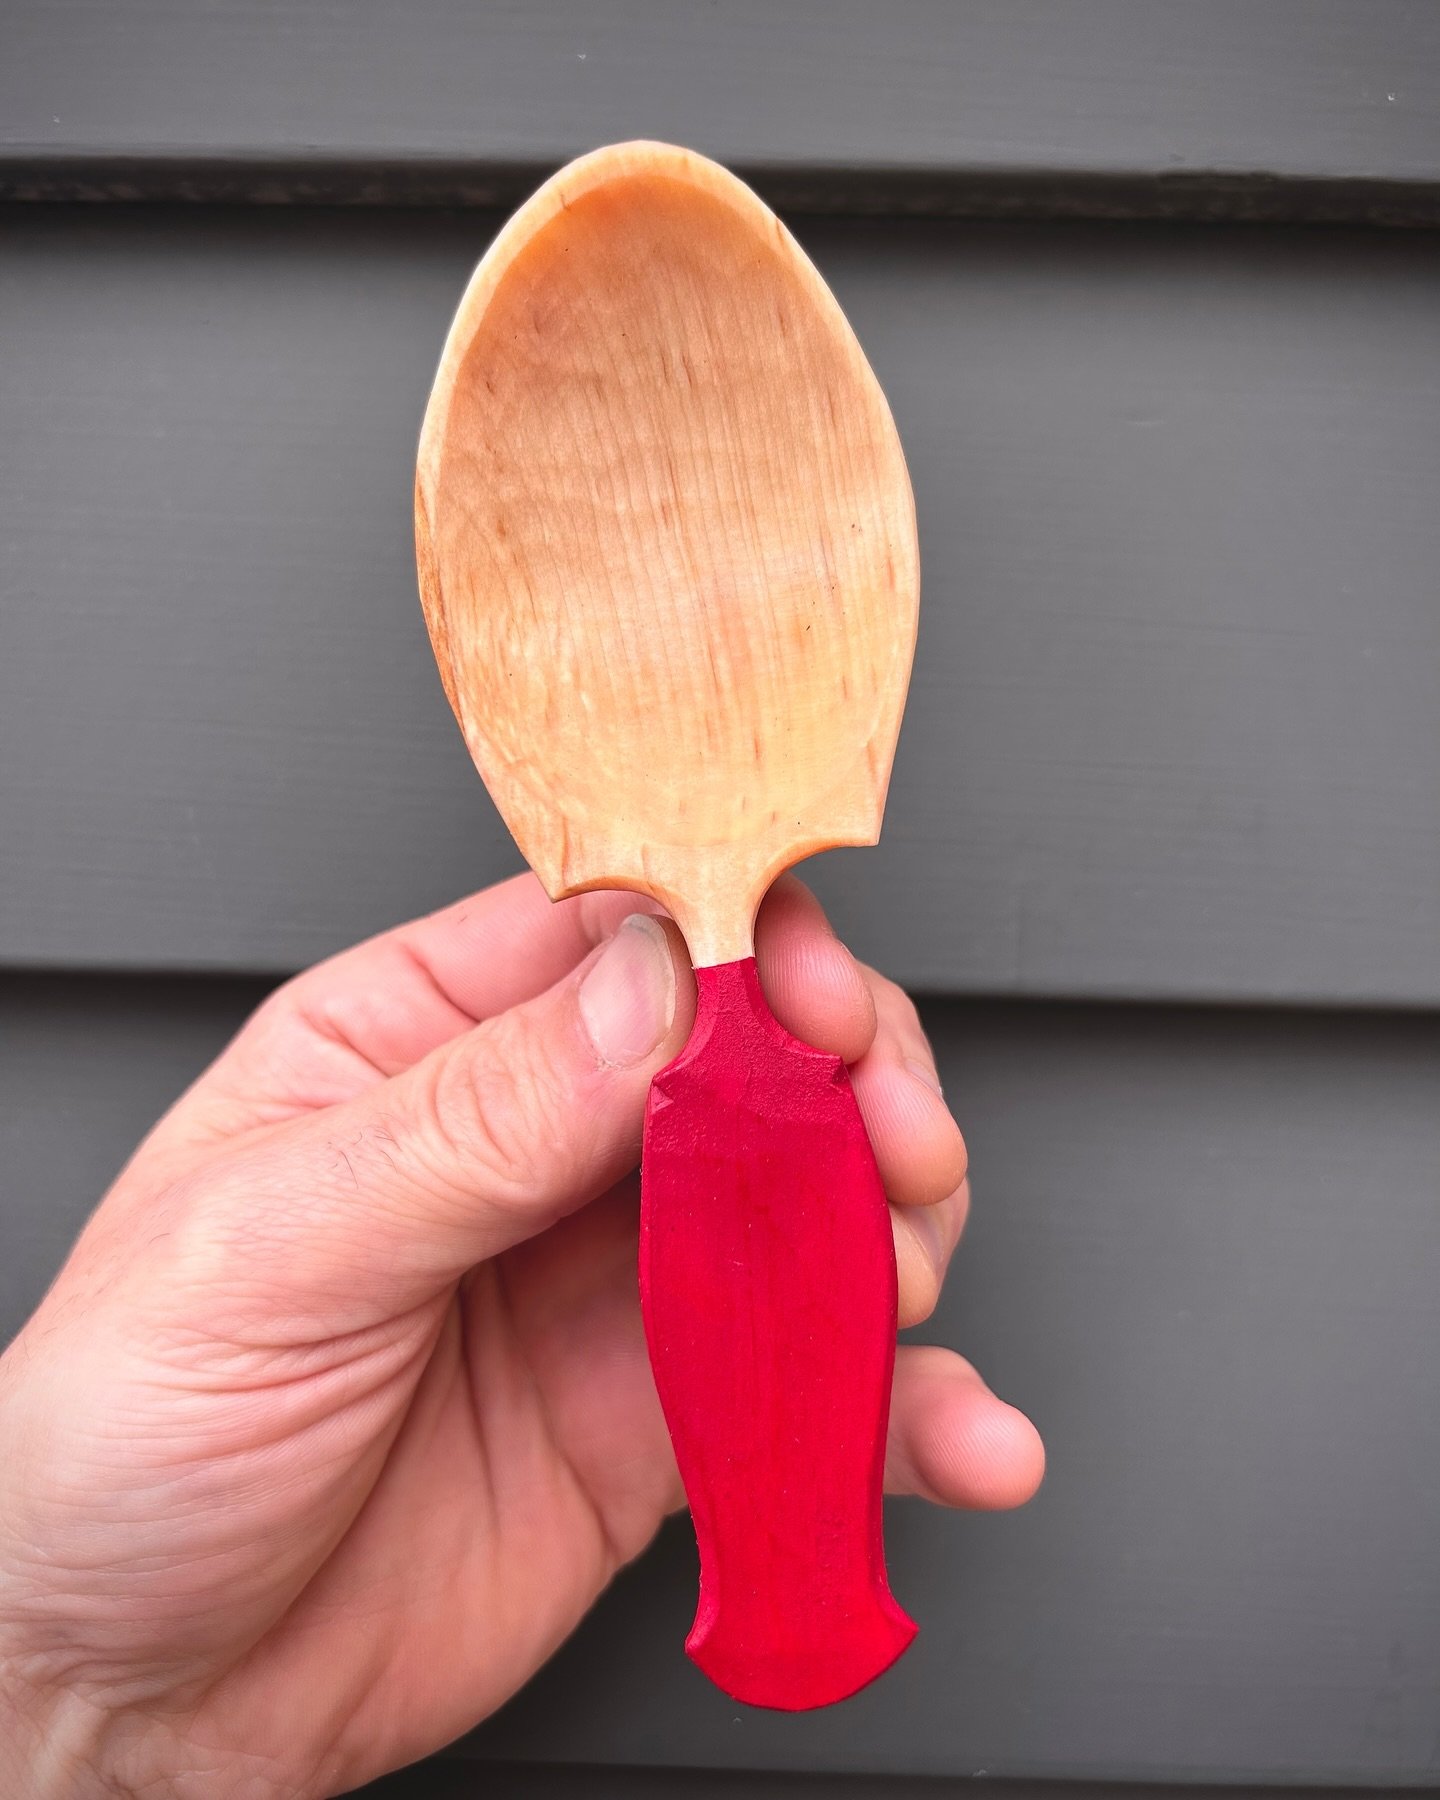 Another day of painting spoons. This red so vivid and pairs nicely with the warm tones of paper birch. All of these are available, I just haven&rsquo;t listed them on my site yet. I&rsquo;m also bringing them to the world&rsquo;s oldest spoon festiva